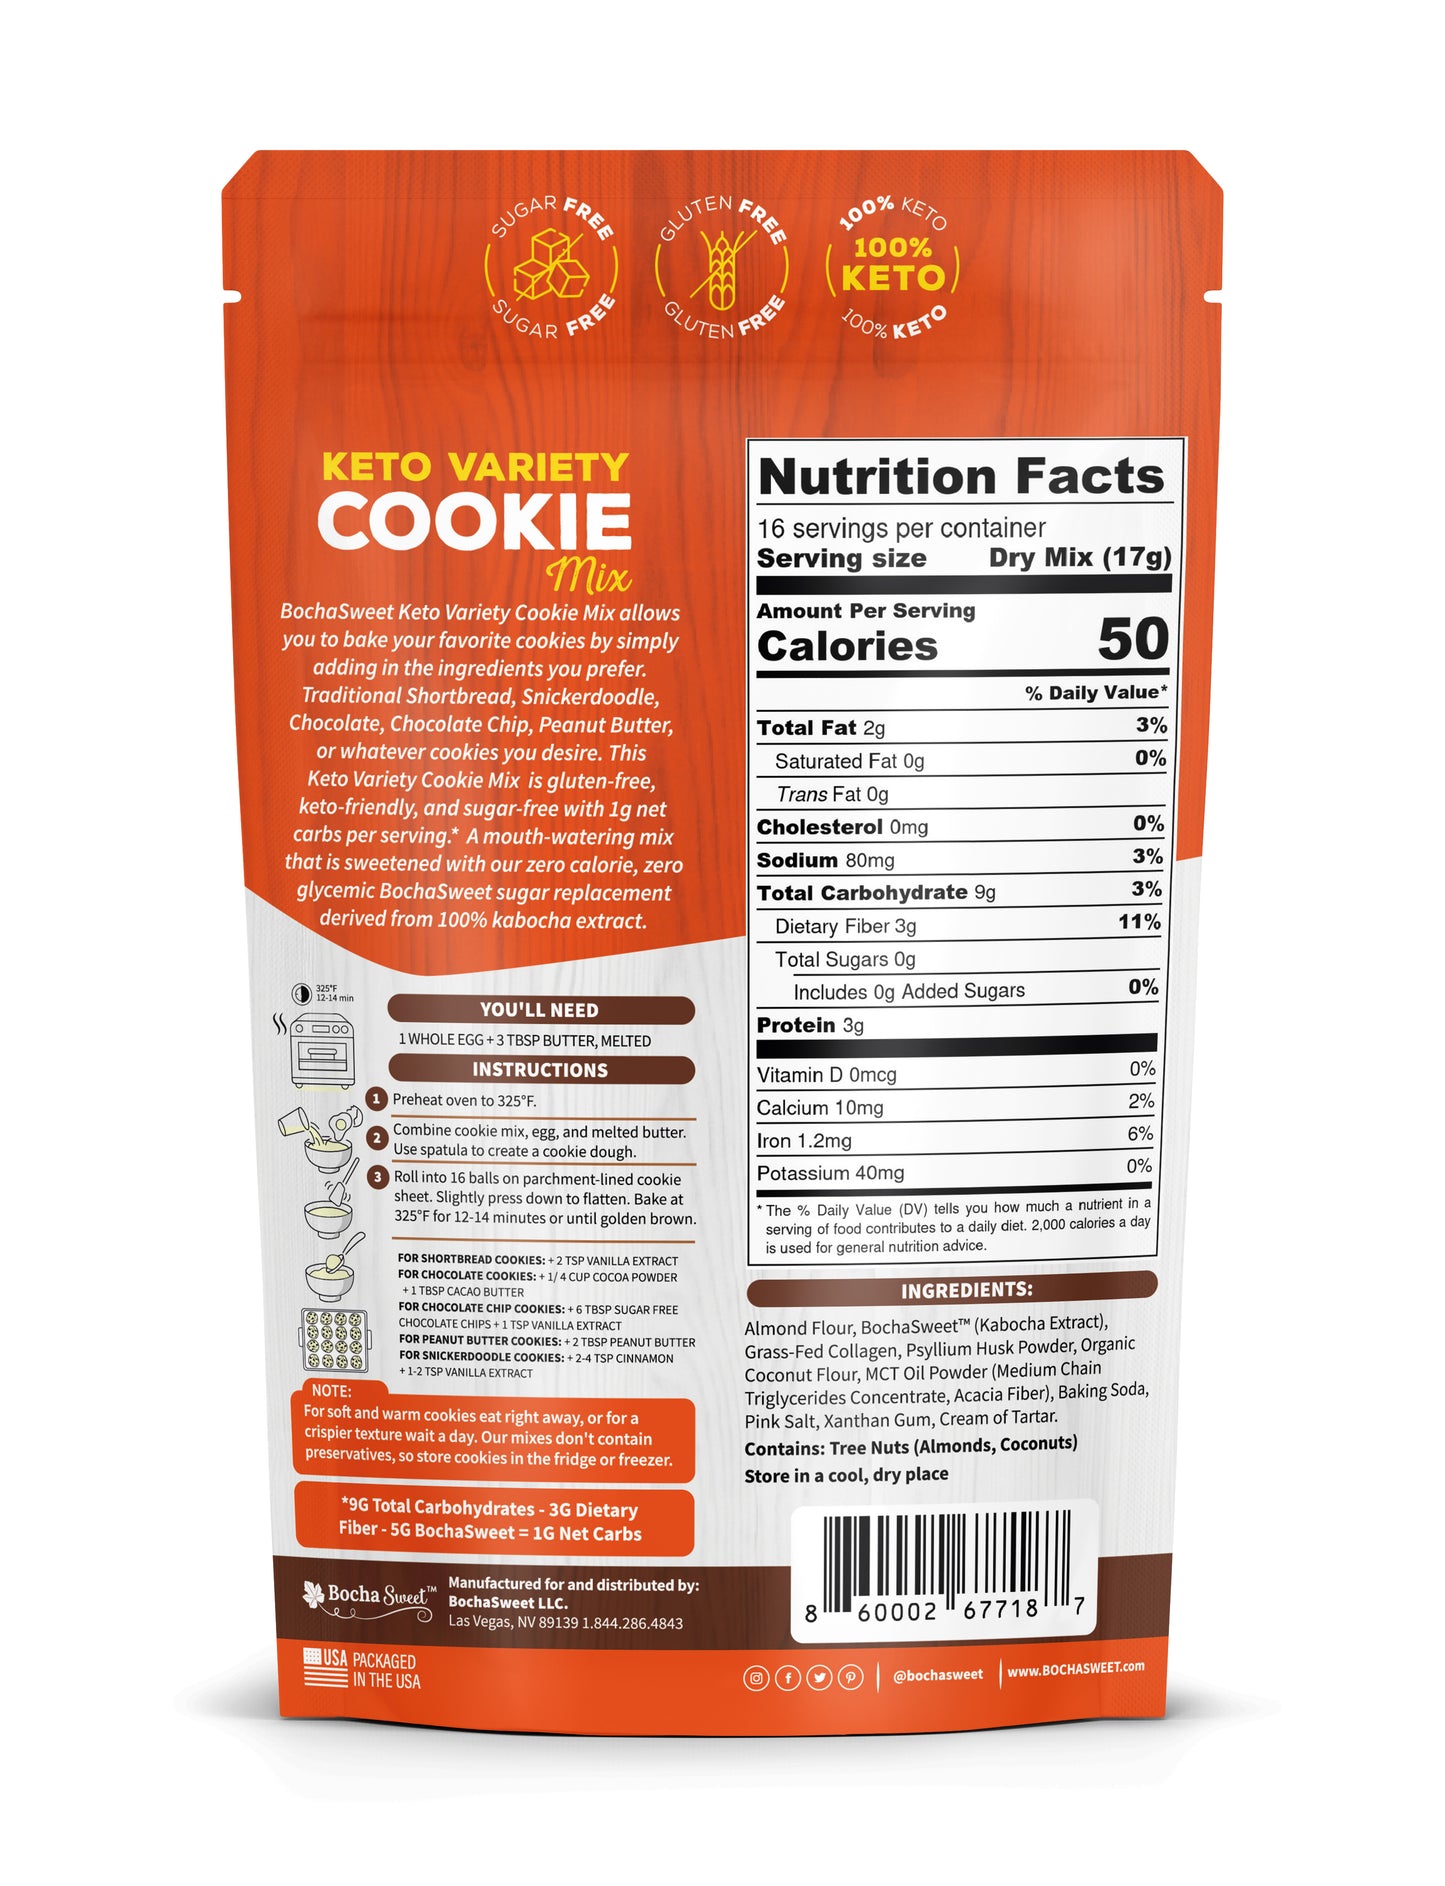 KETO VARIETY SOFT-BAKED COOKIE MIX